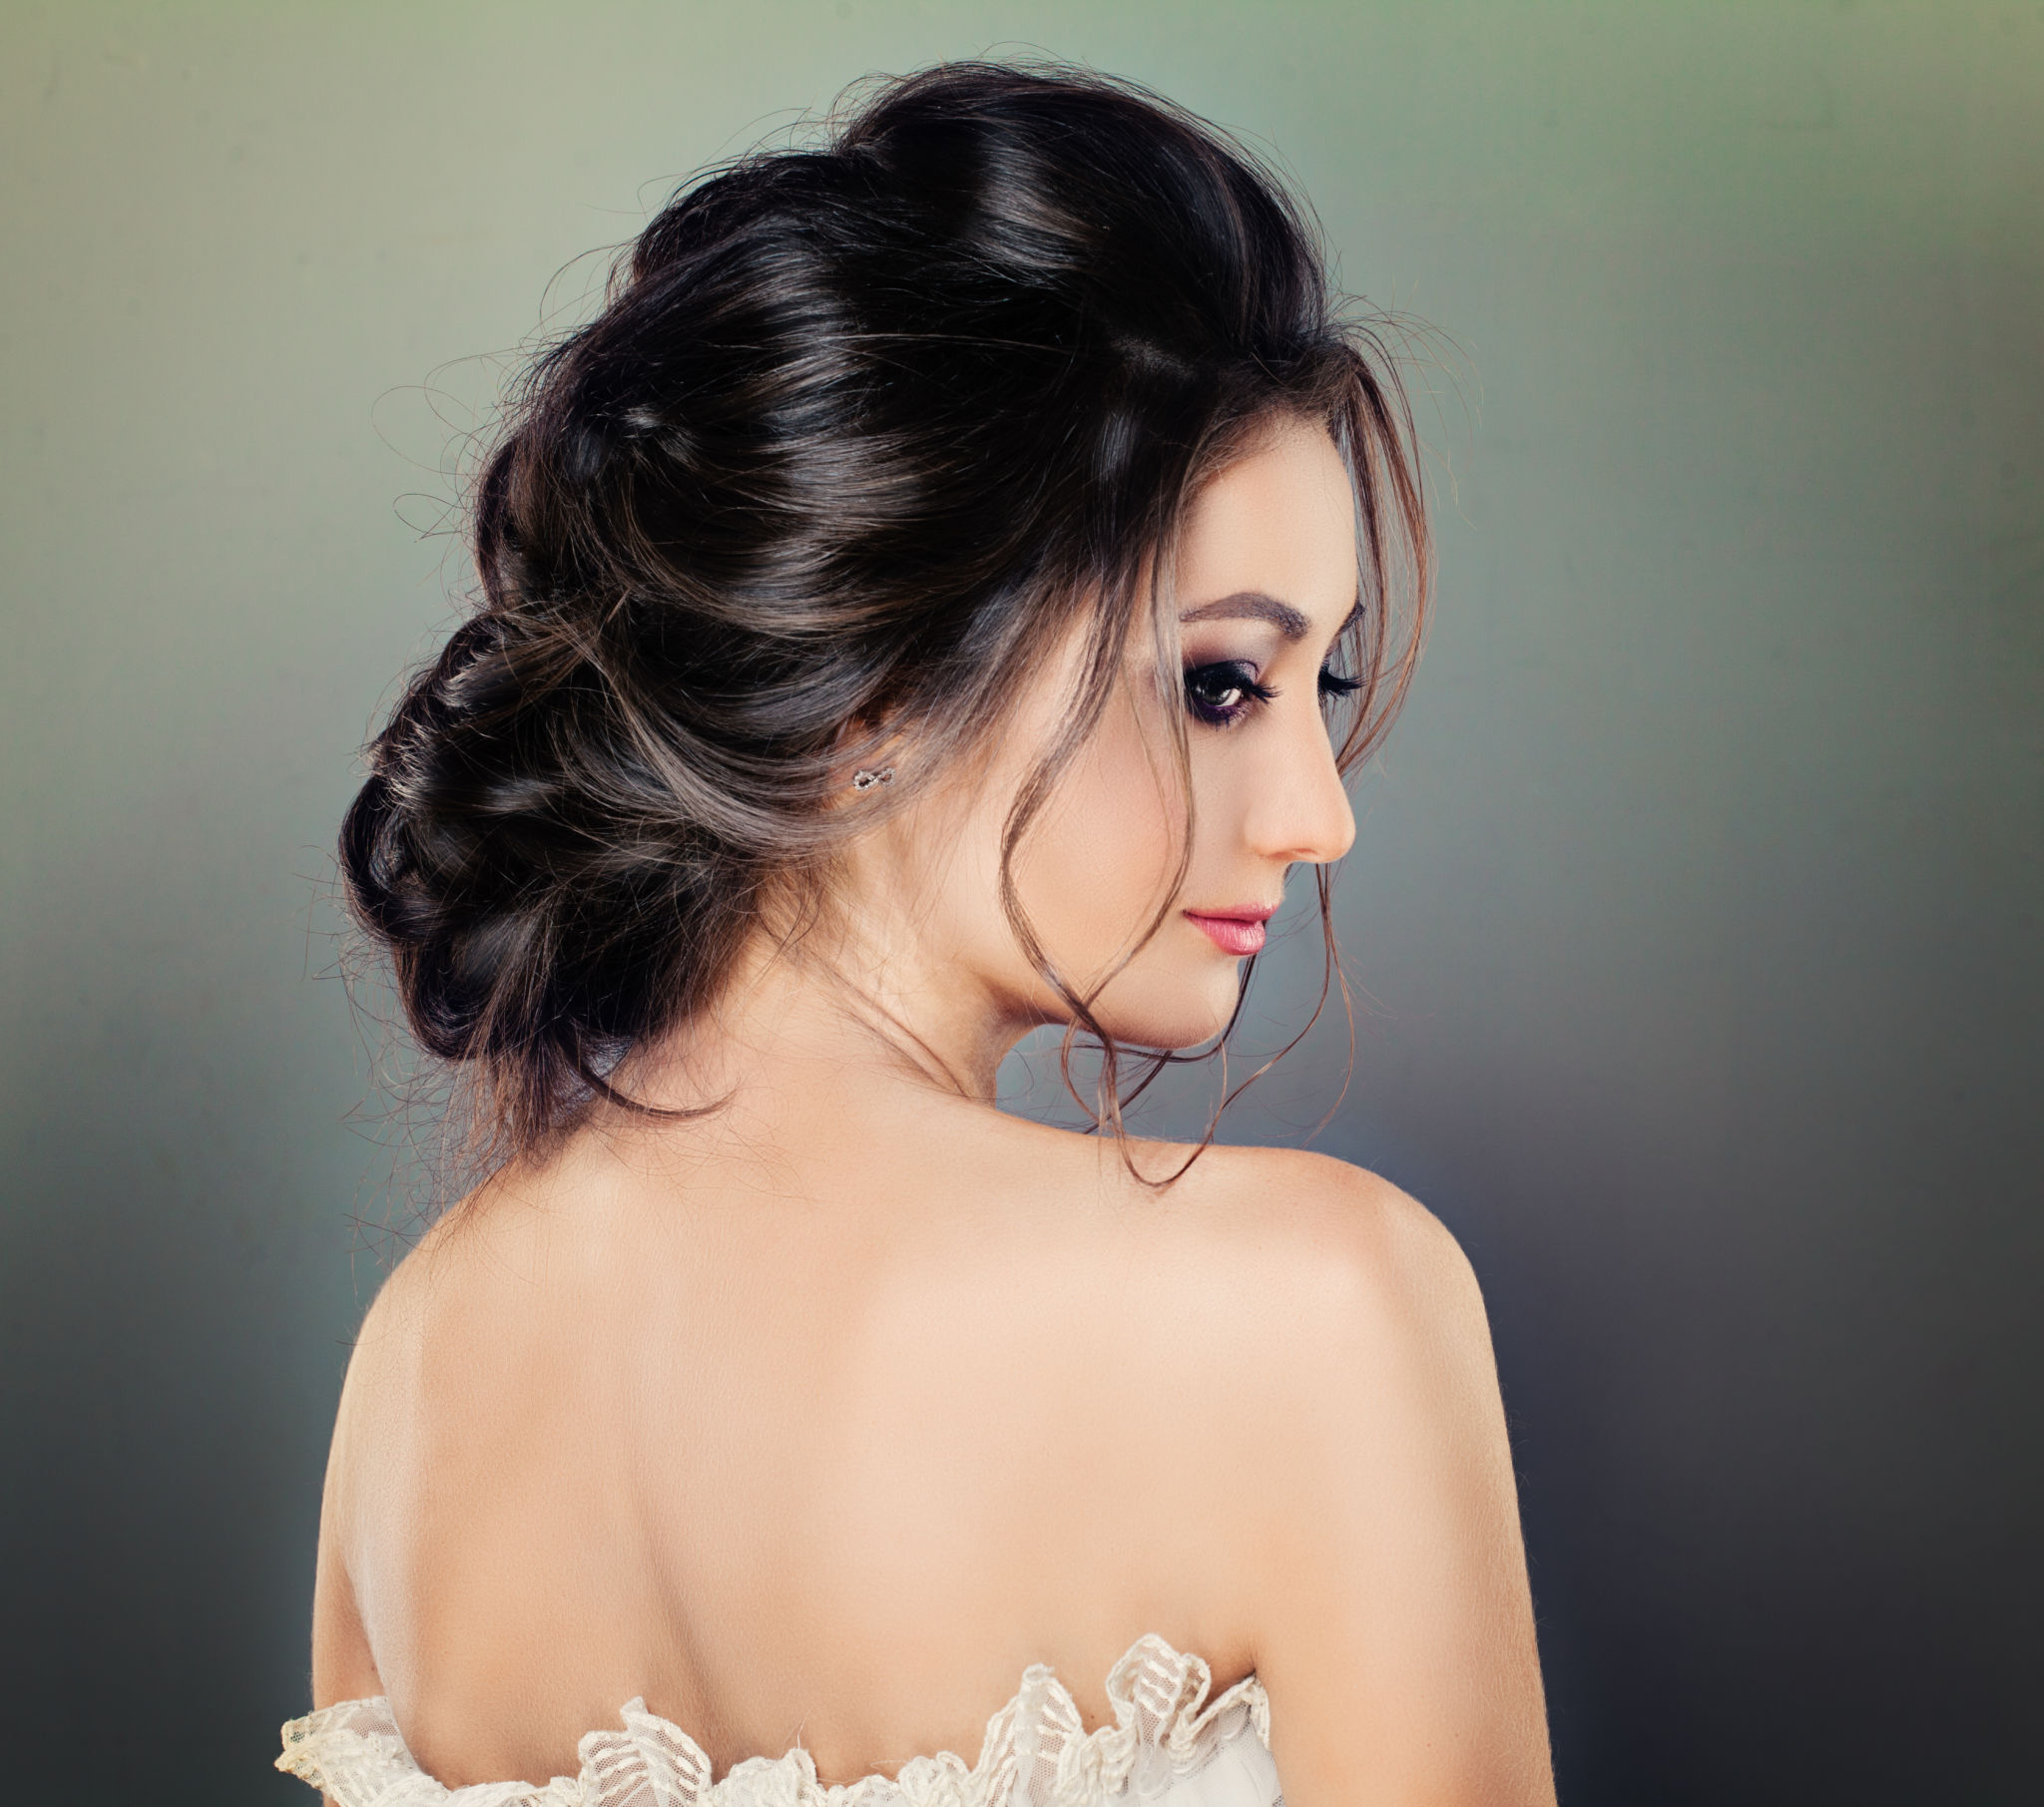 Beautiful Woman with Wedding Hairstyle and Perfect Makeup, Fashion Portrait